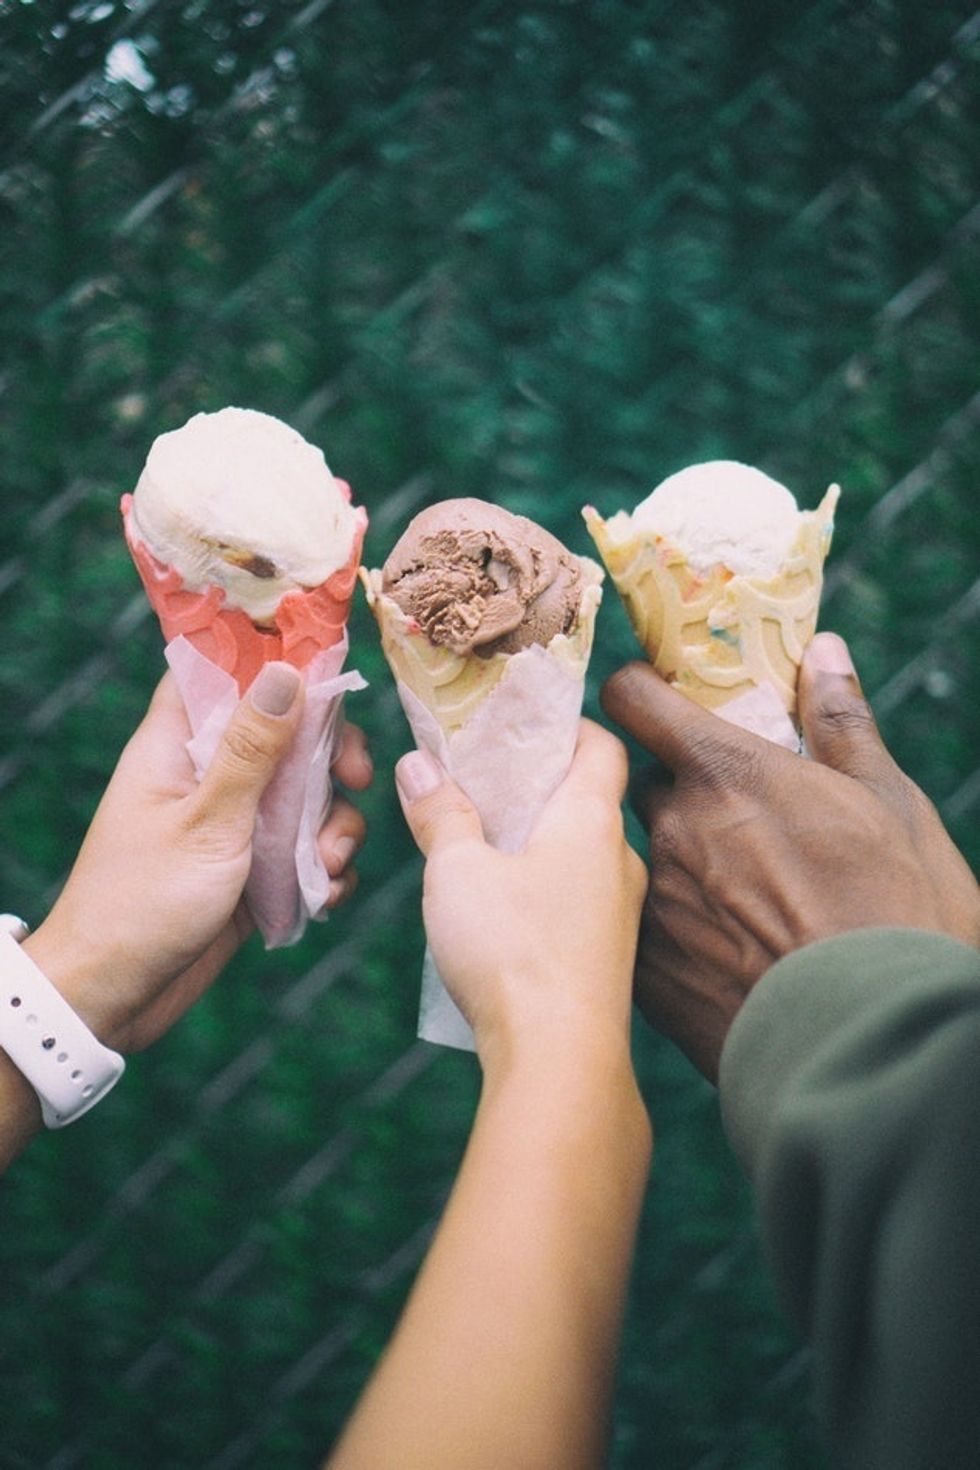 The Best “Ice Creams” for Those with Lactose Intolerance